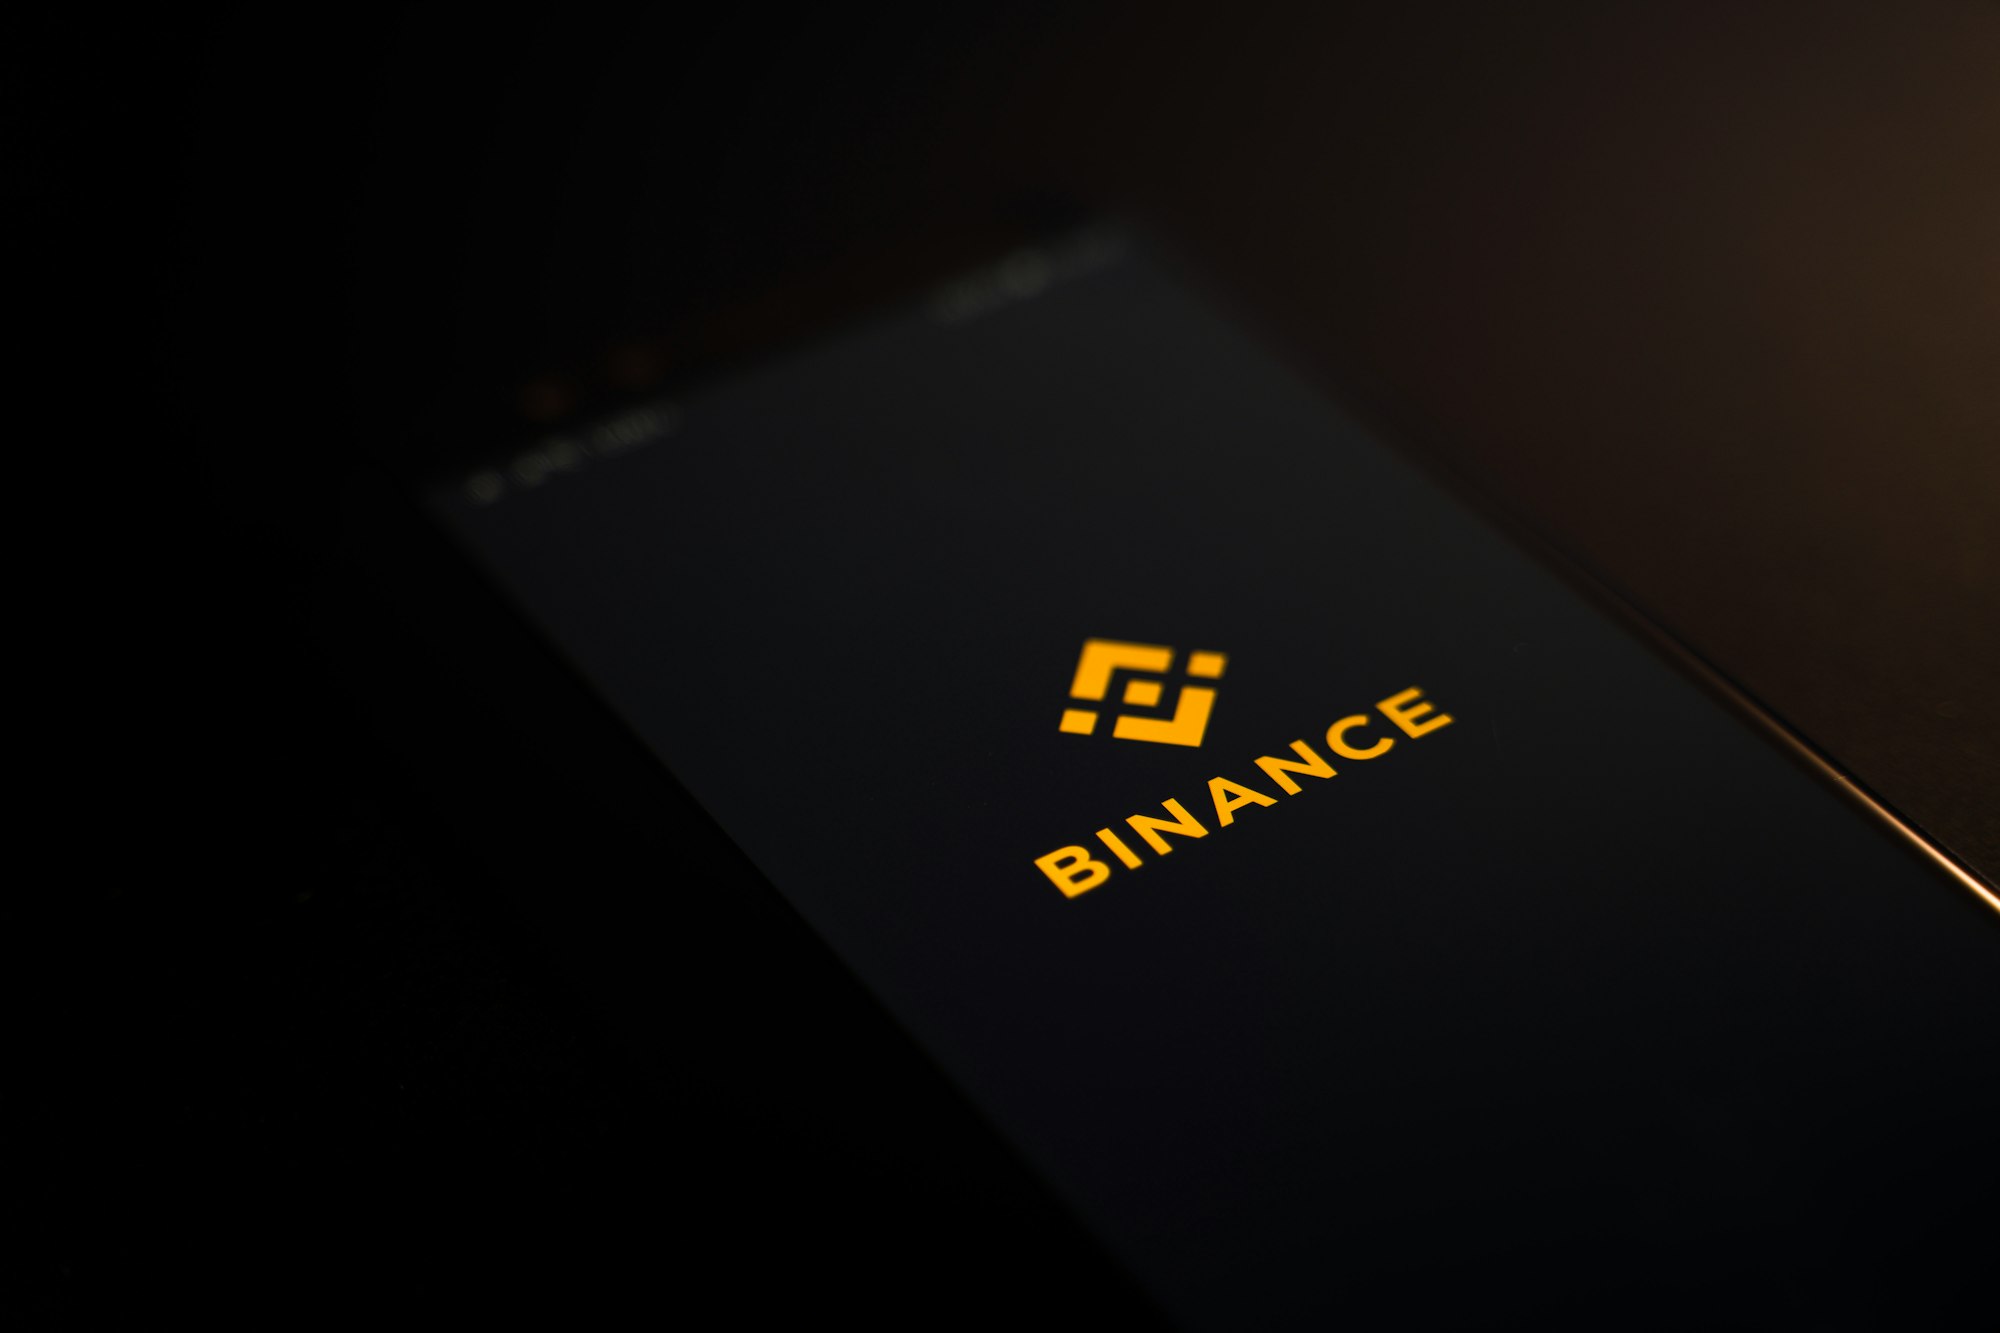 Binance expands to Japan with the acquisition of a regulated crypto exchange